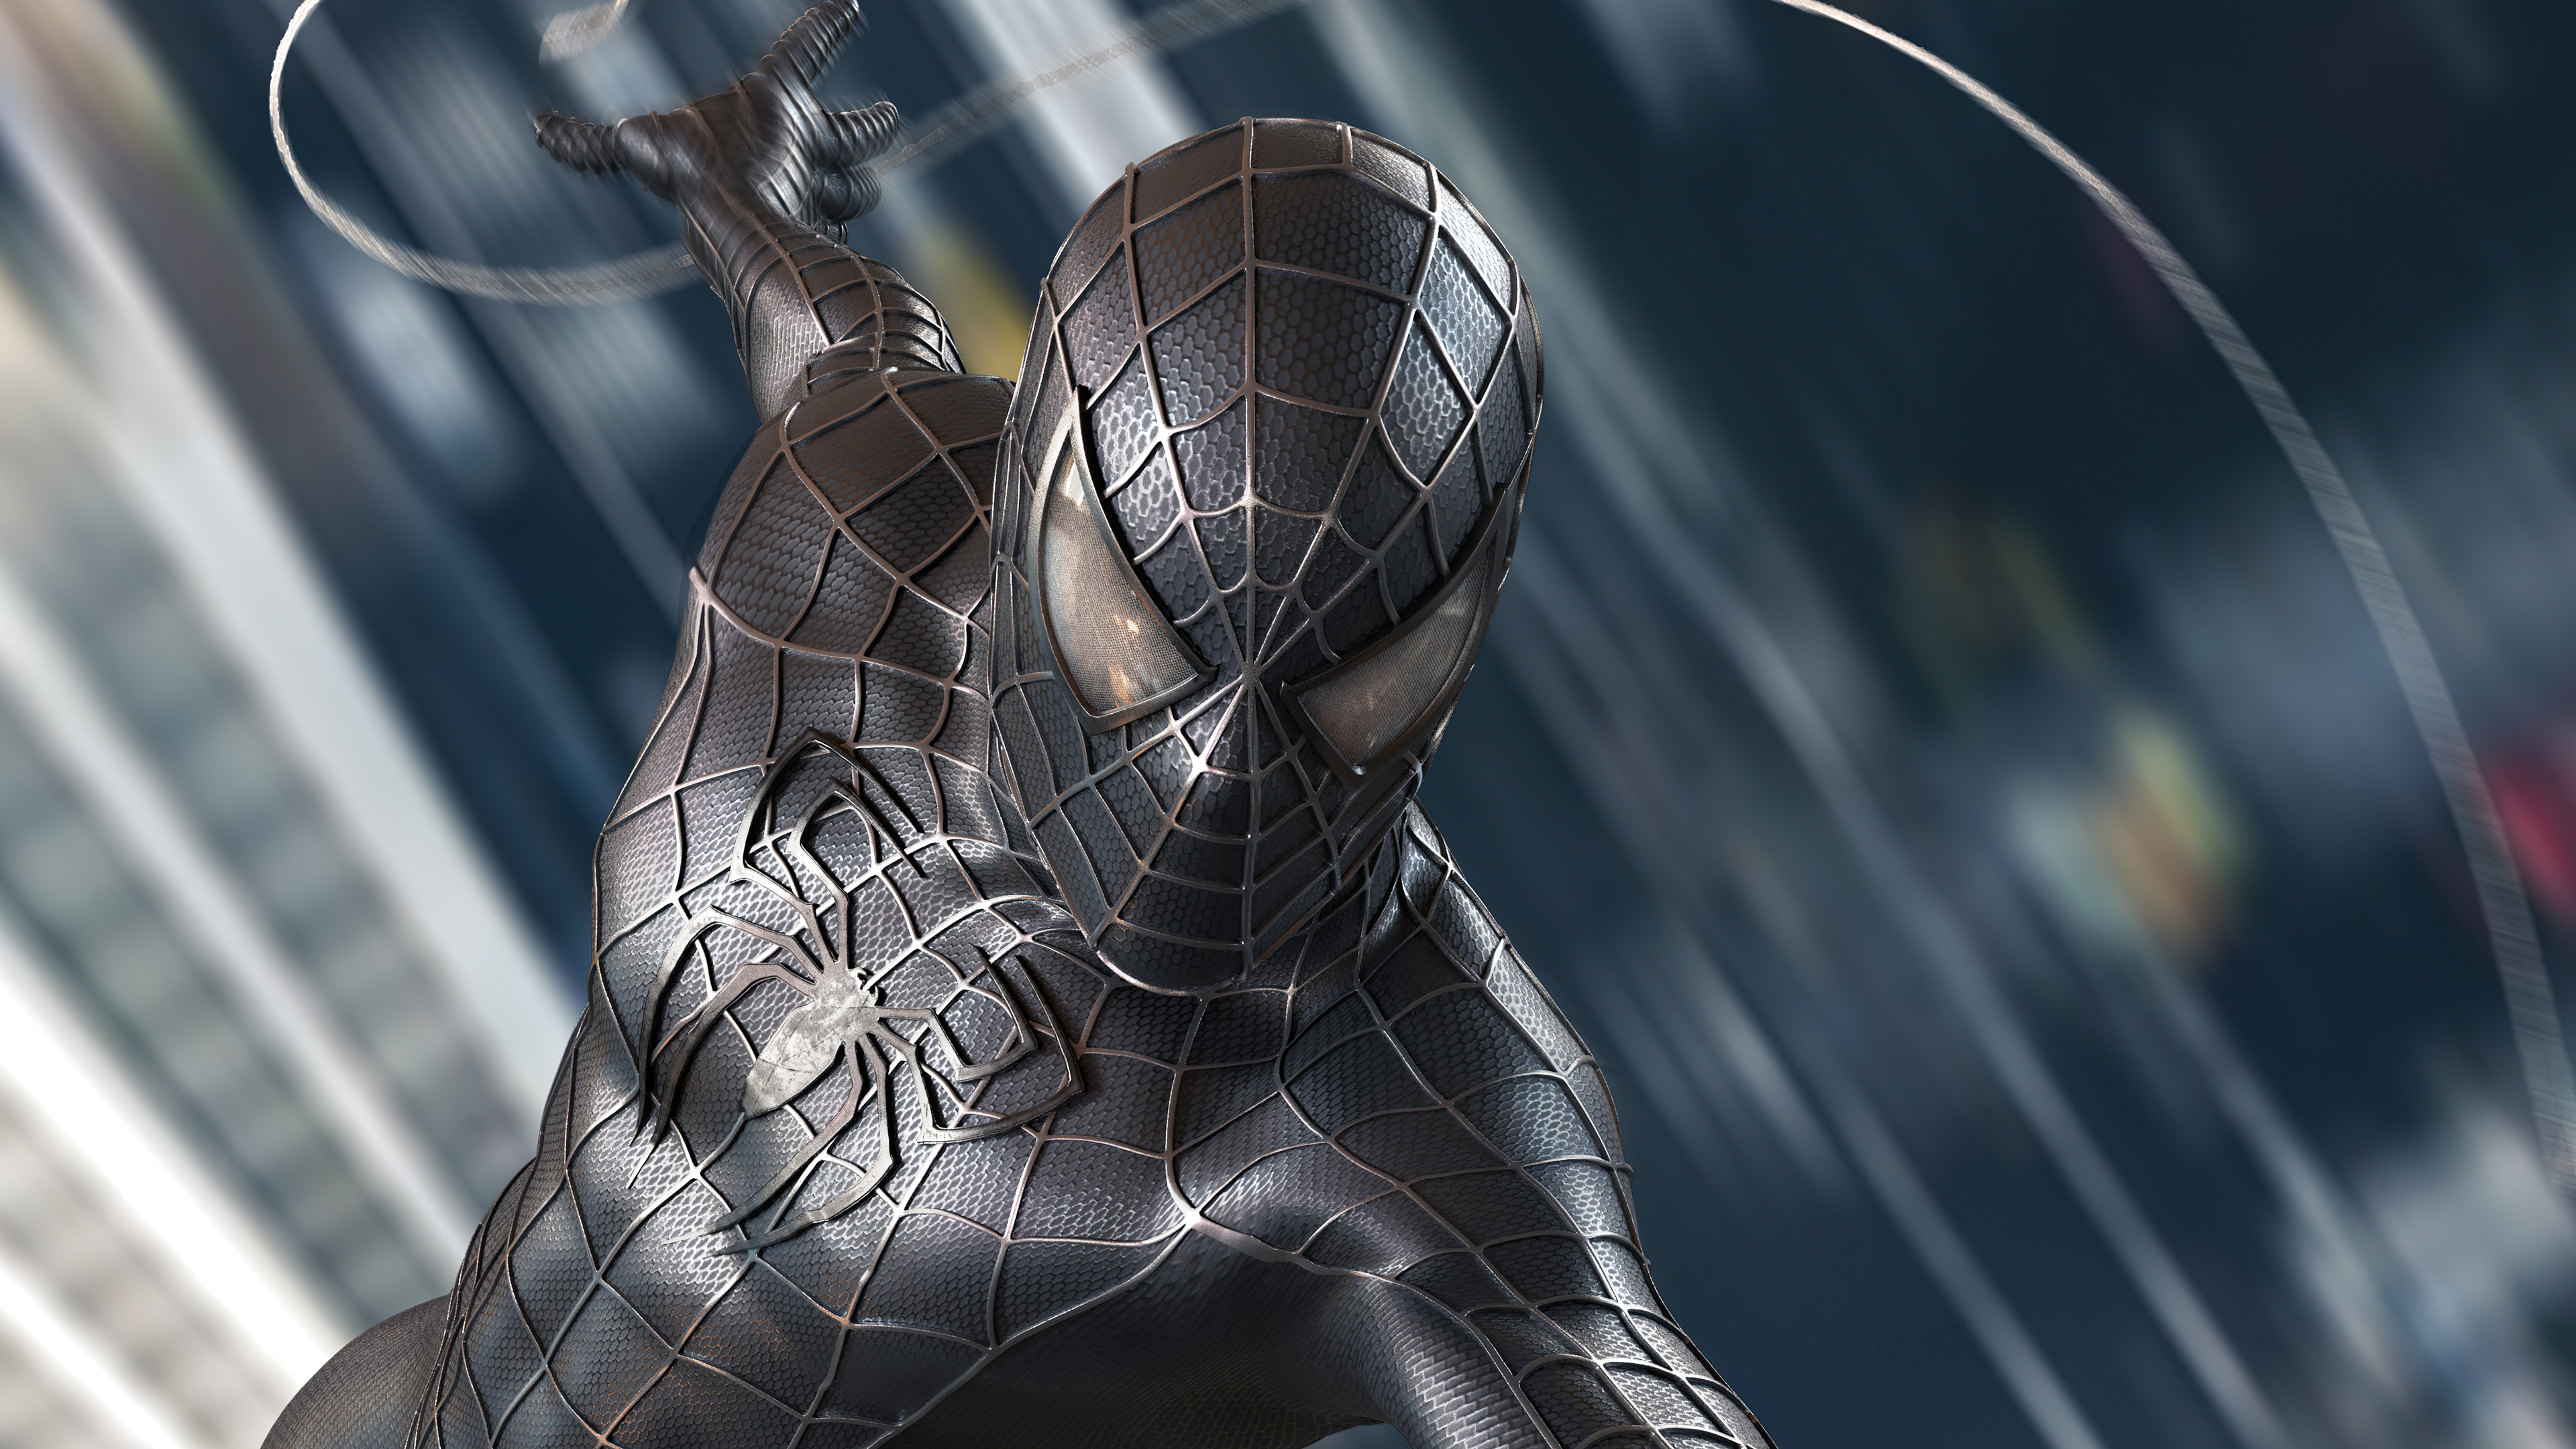 3840x2160 Spider Man Black Symbiote Suit 4k, HD Superheroes, 4k Wallpapers, Images, Backgrounds, Photos and Pictures